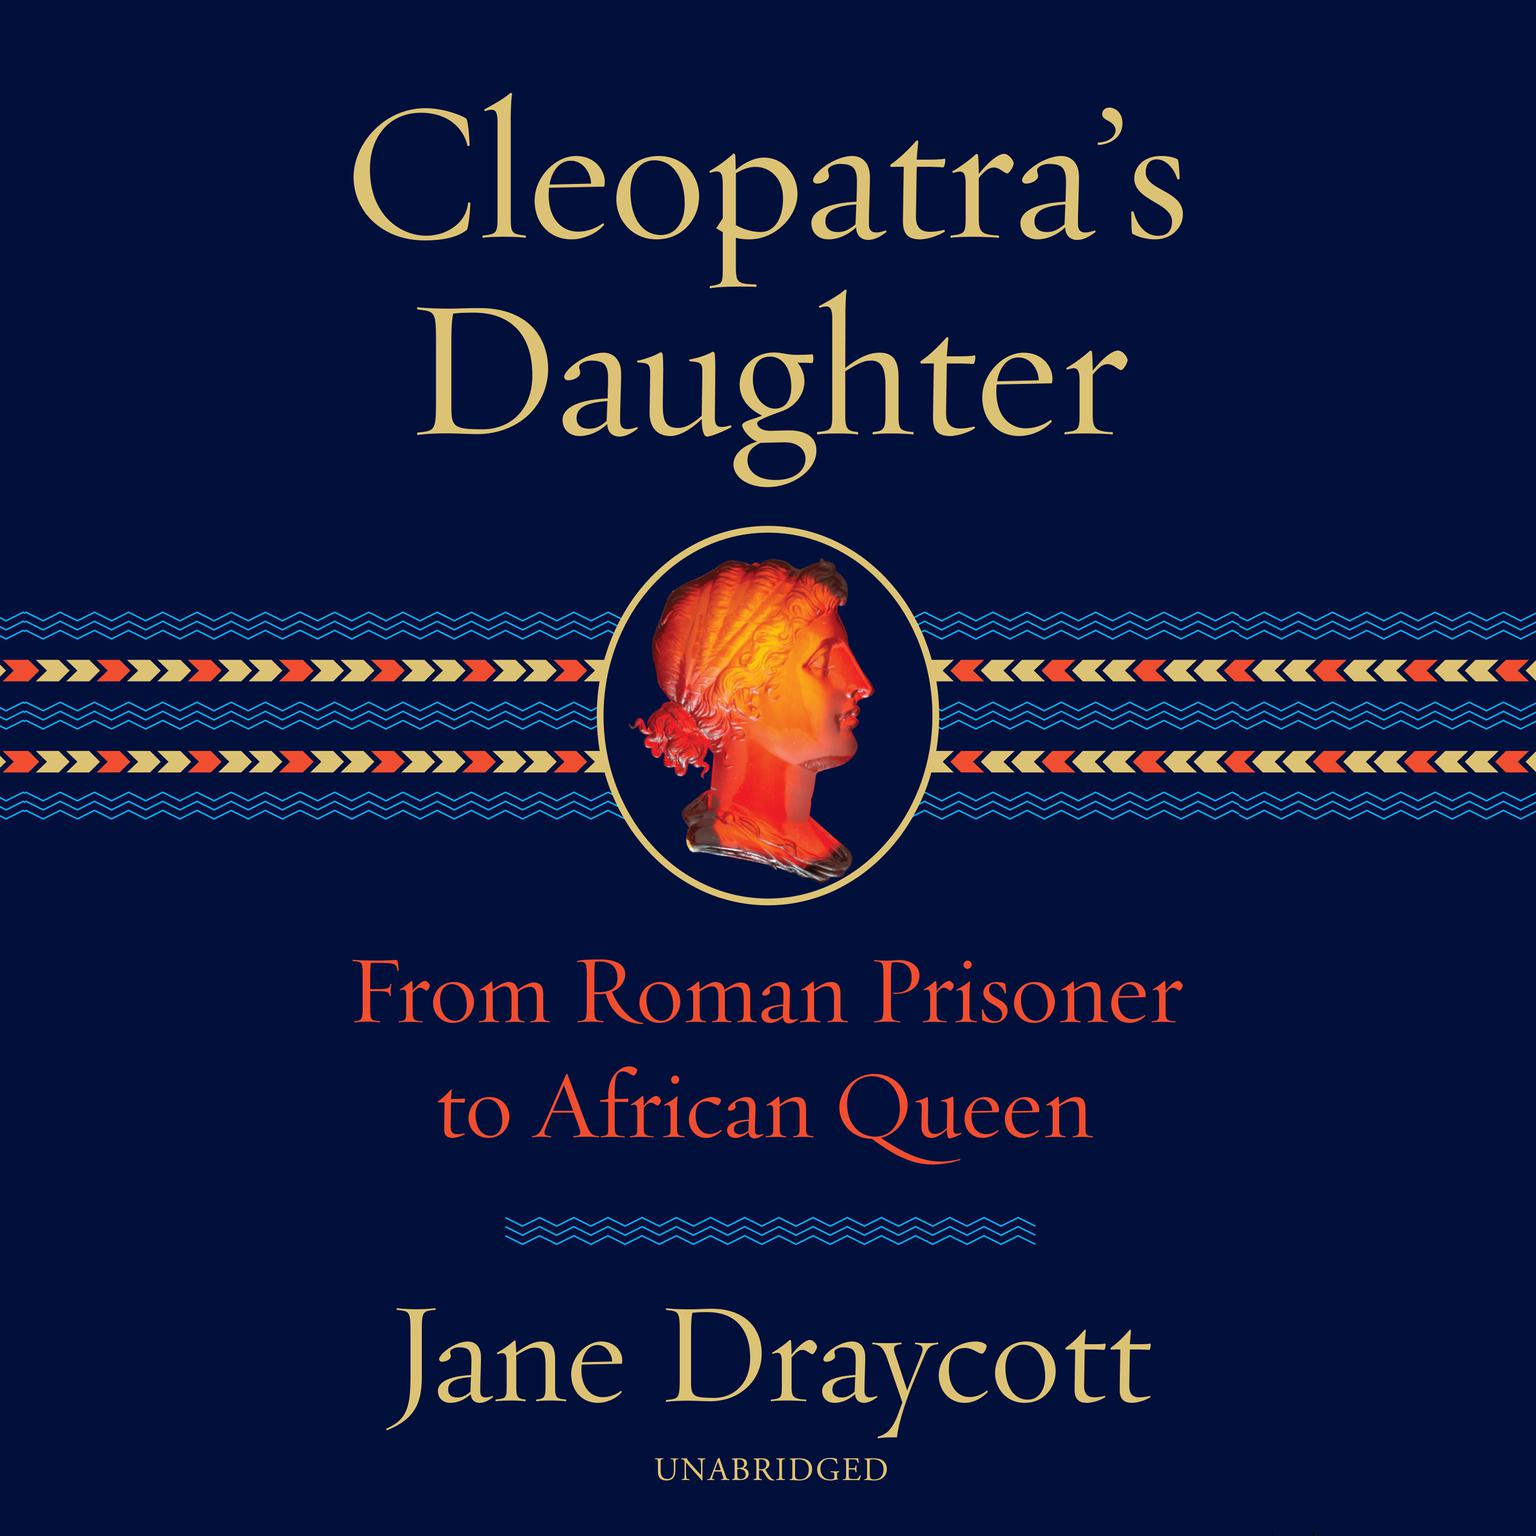 Cleopatras Daughter: From Roman Prisoner to African Queen Audiobook, by Jane Draycott